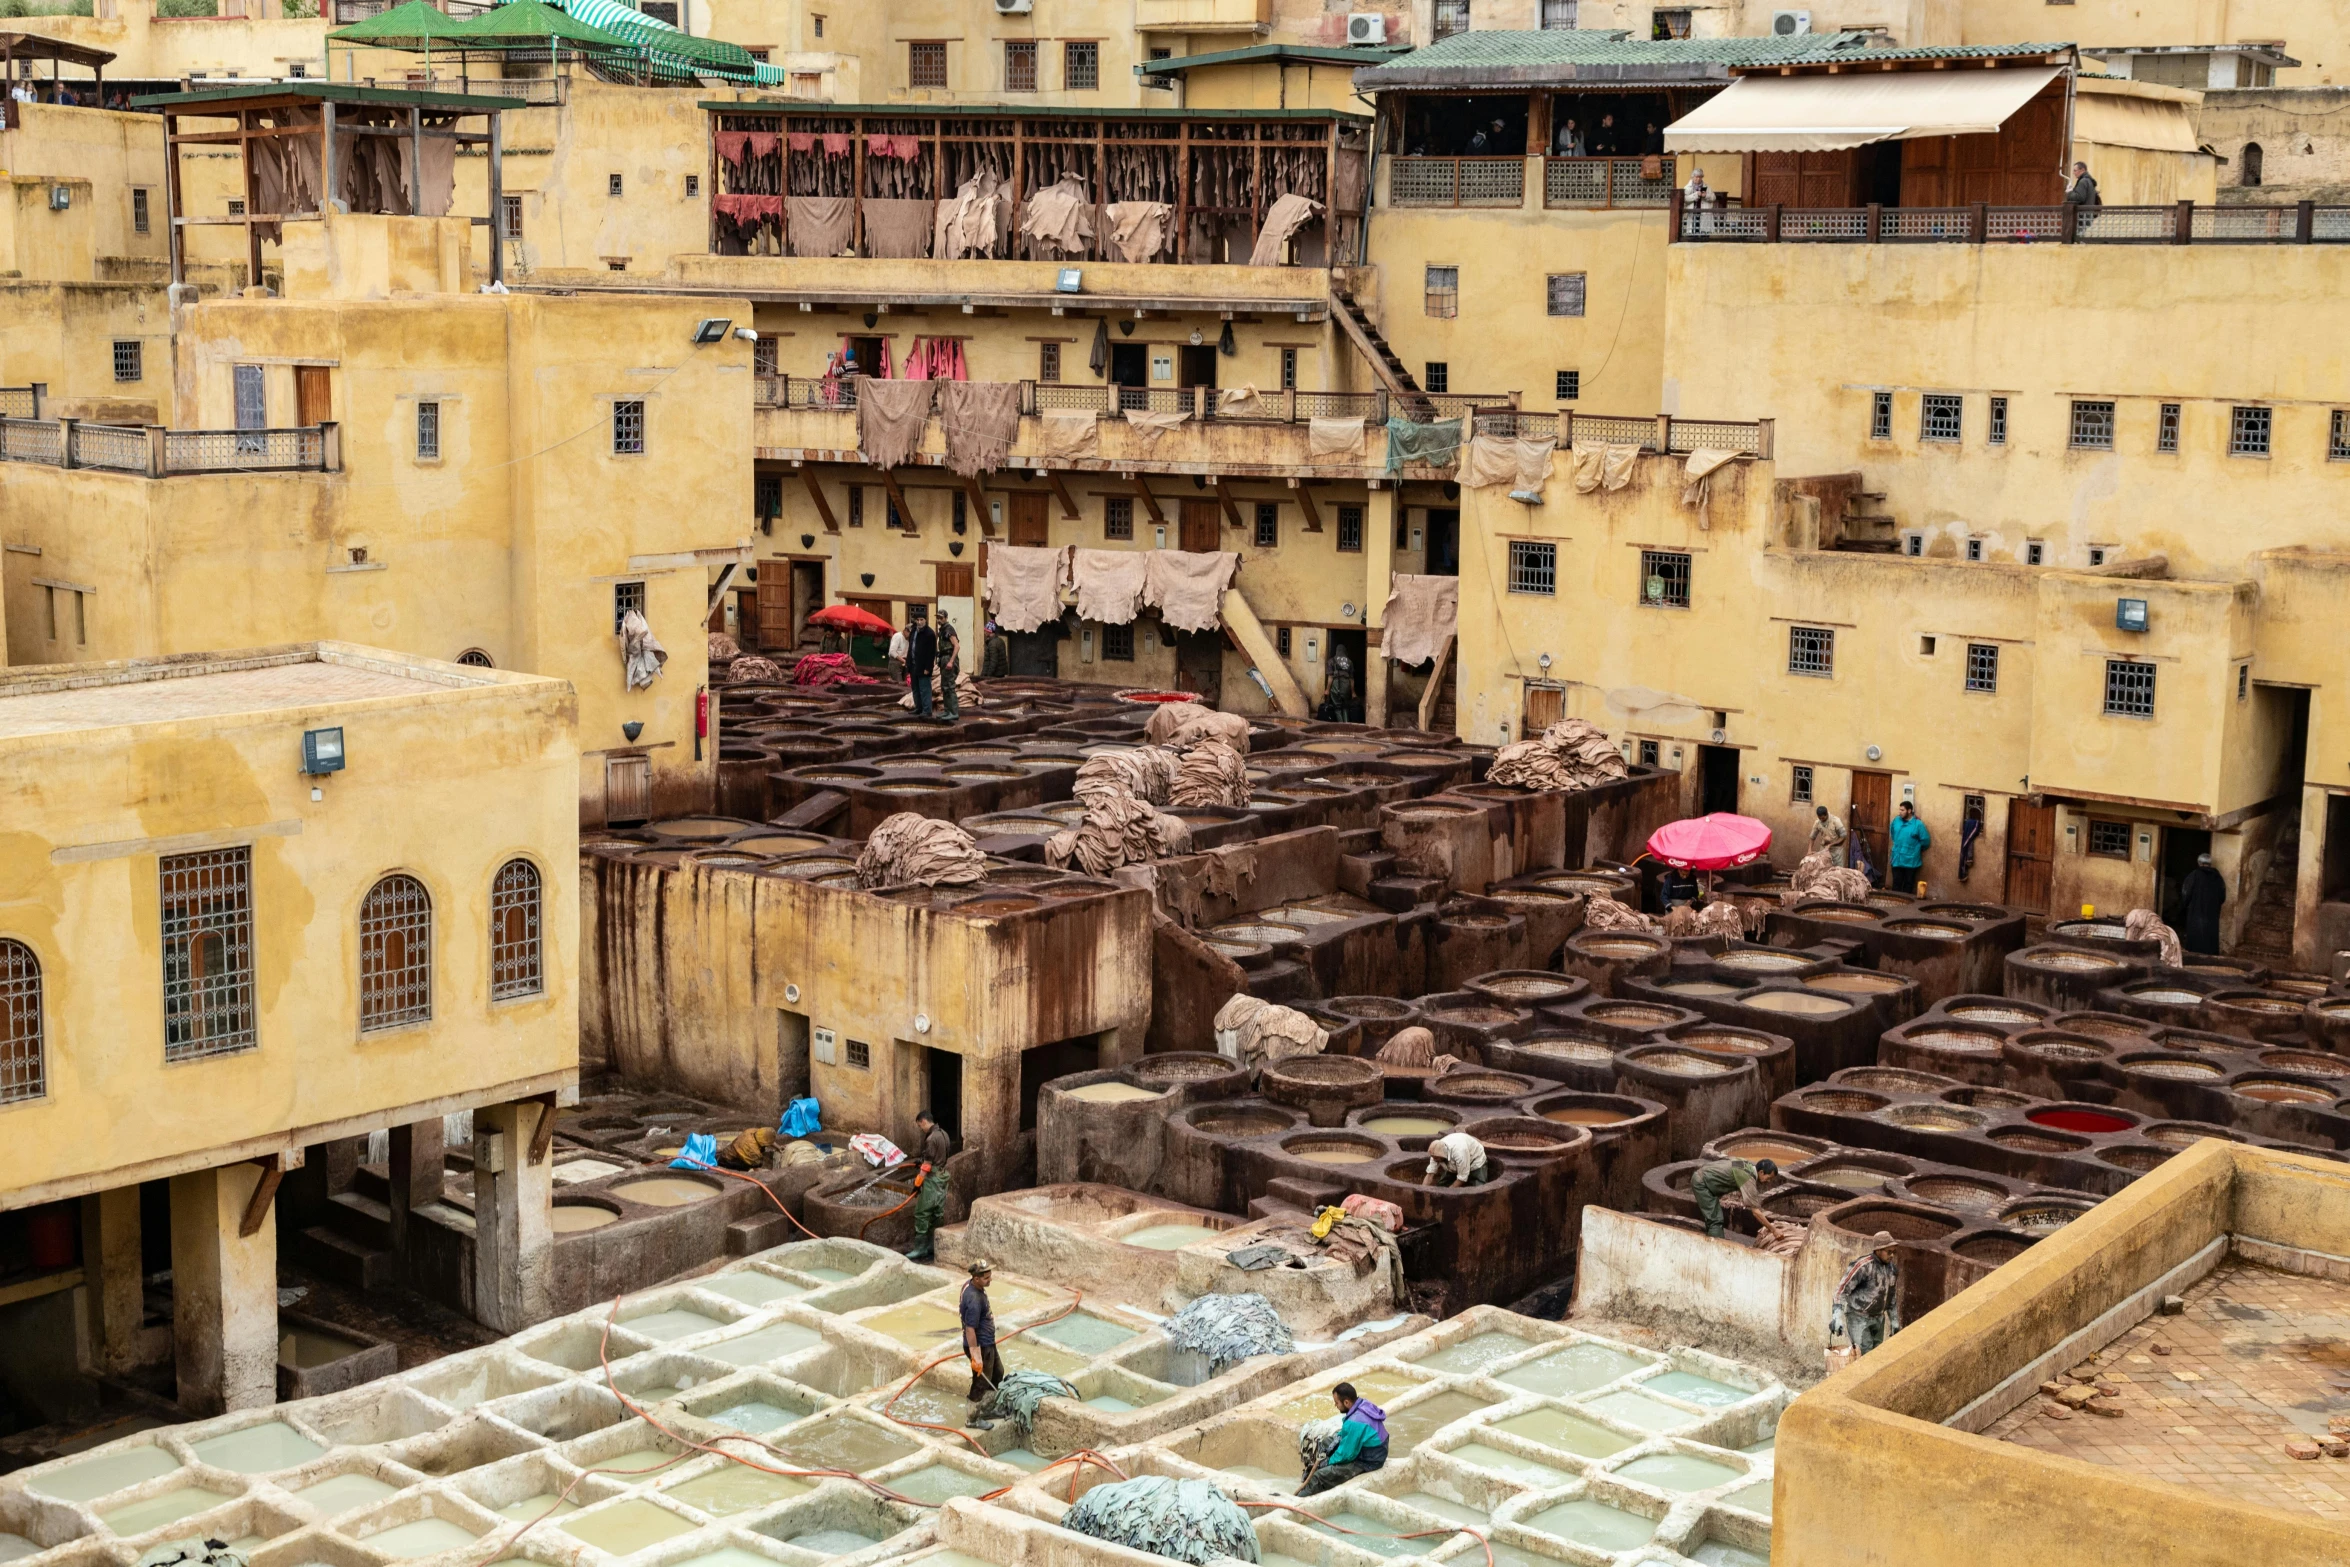 an overhead view of two buildings with people and laundry drying